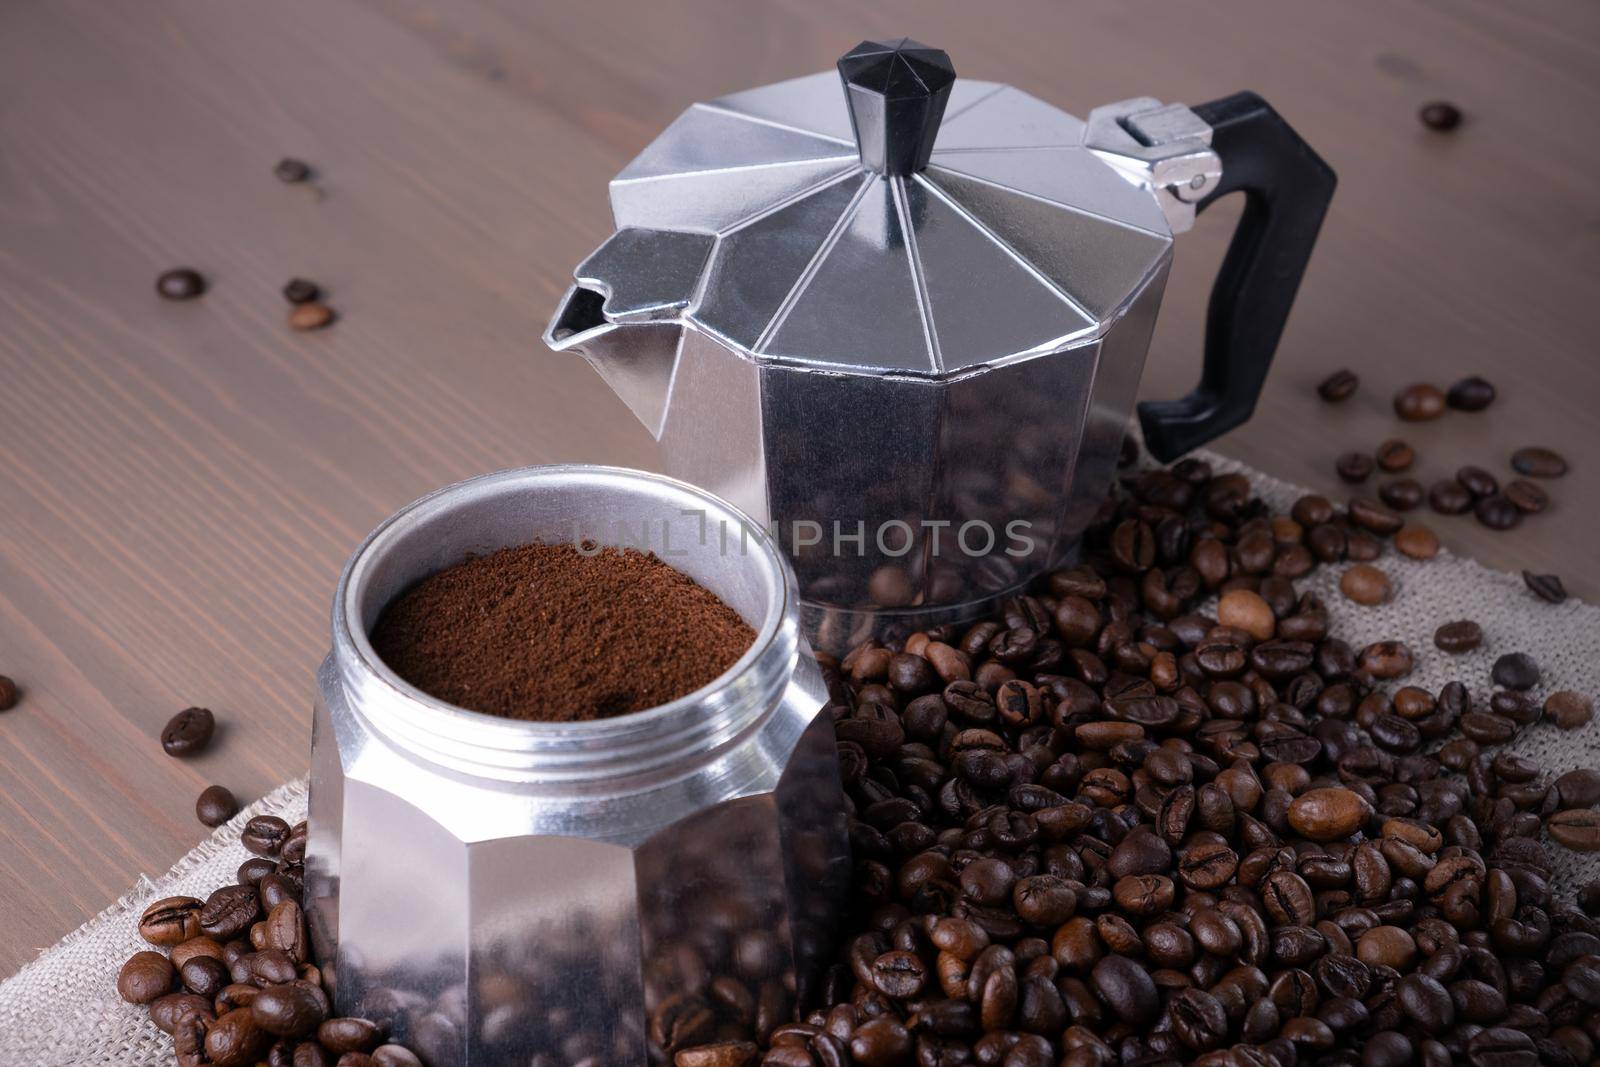 Close-up of disassembled geyser coffee maker on wooden surface. Coffee beans in pile, ground and brewed coffee. Coffee preparation. Selective focus.